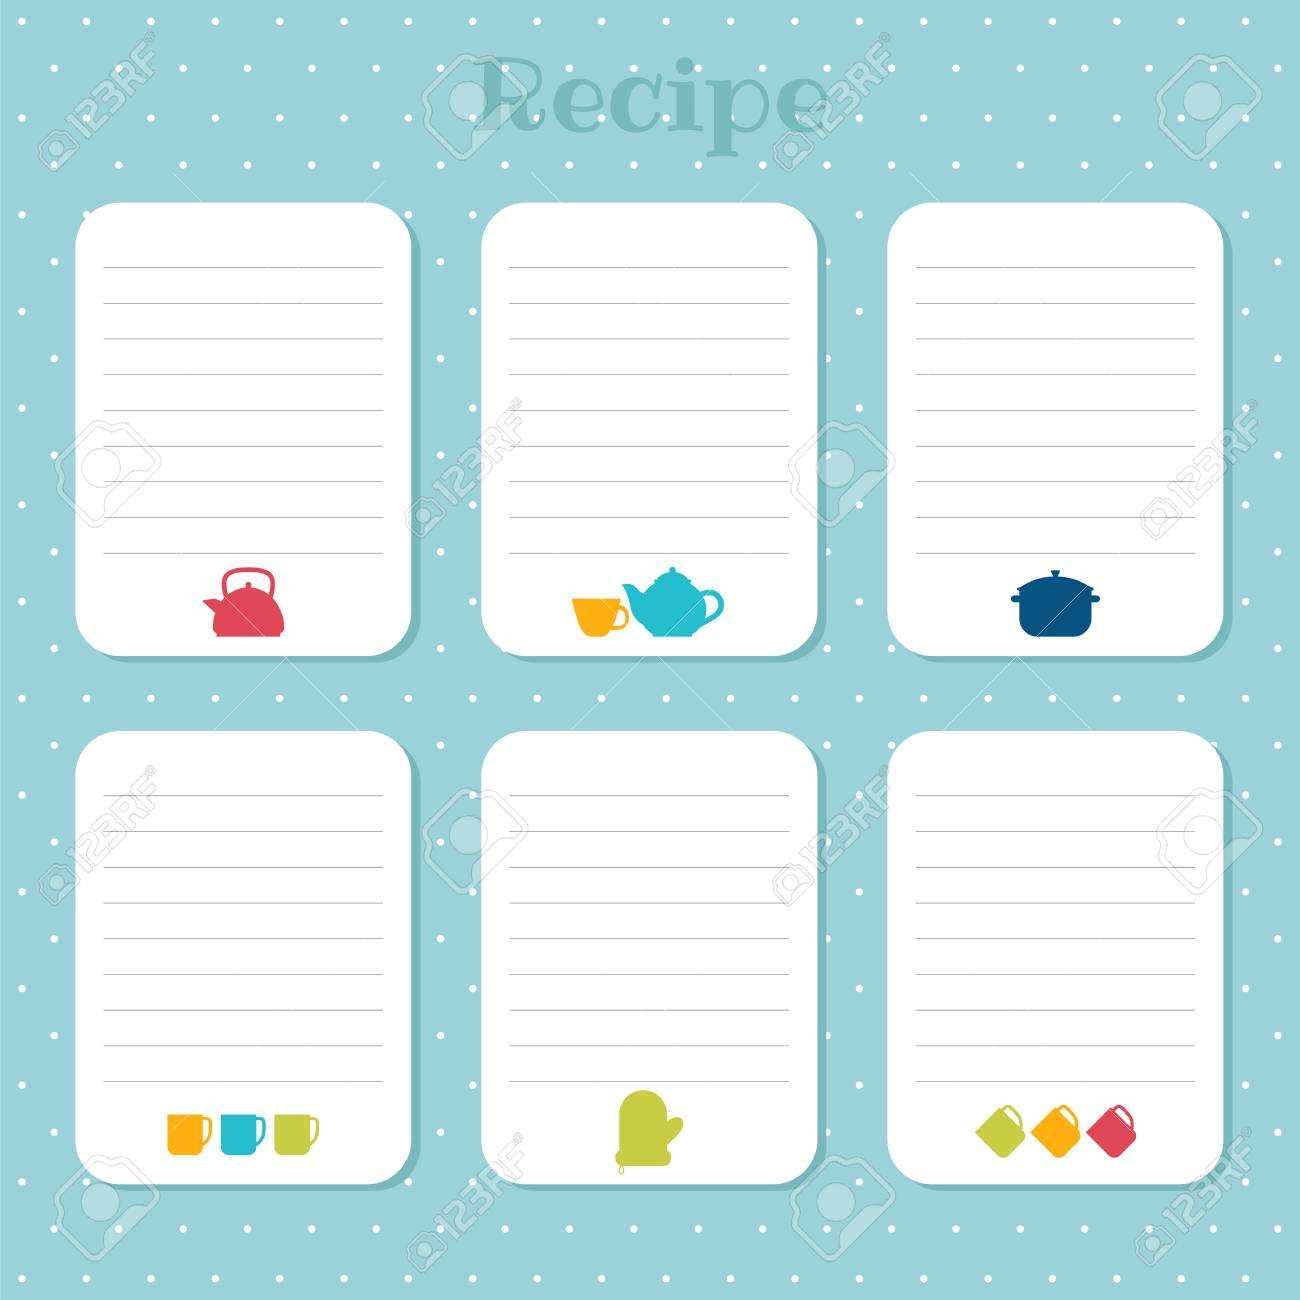 Recipe Cards Set. Cooking Card Templates. For Restaurant, Cafe,.. Inside Restaurant Recipe Card Template